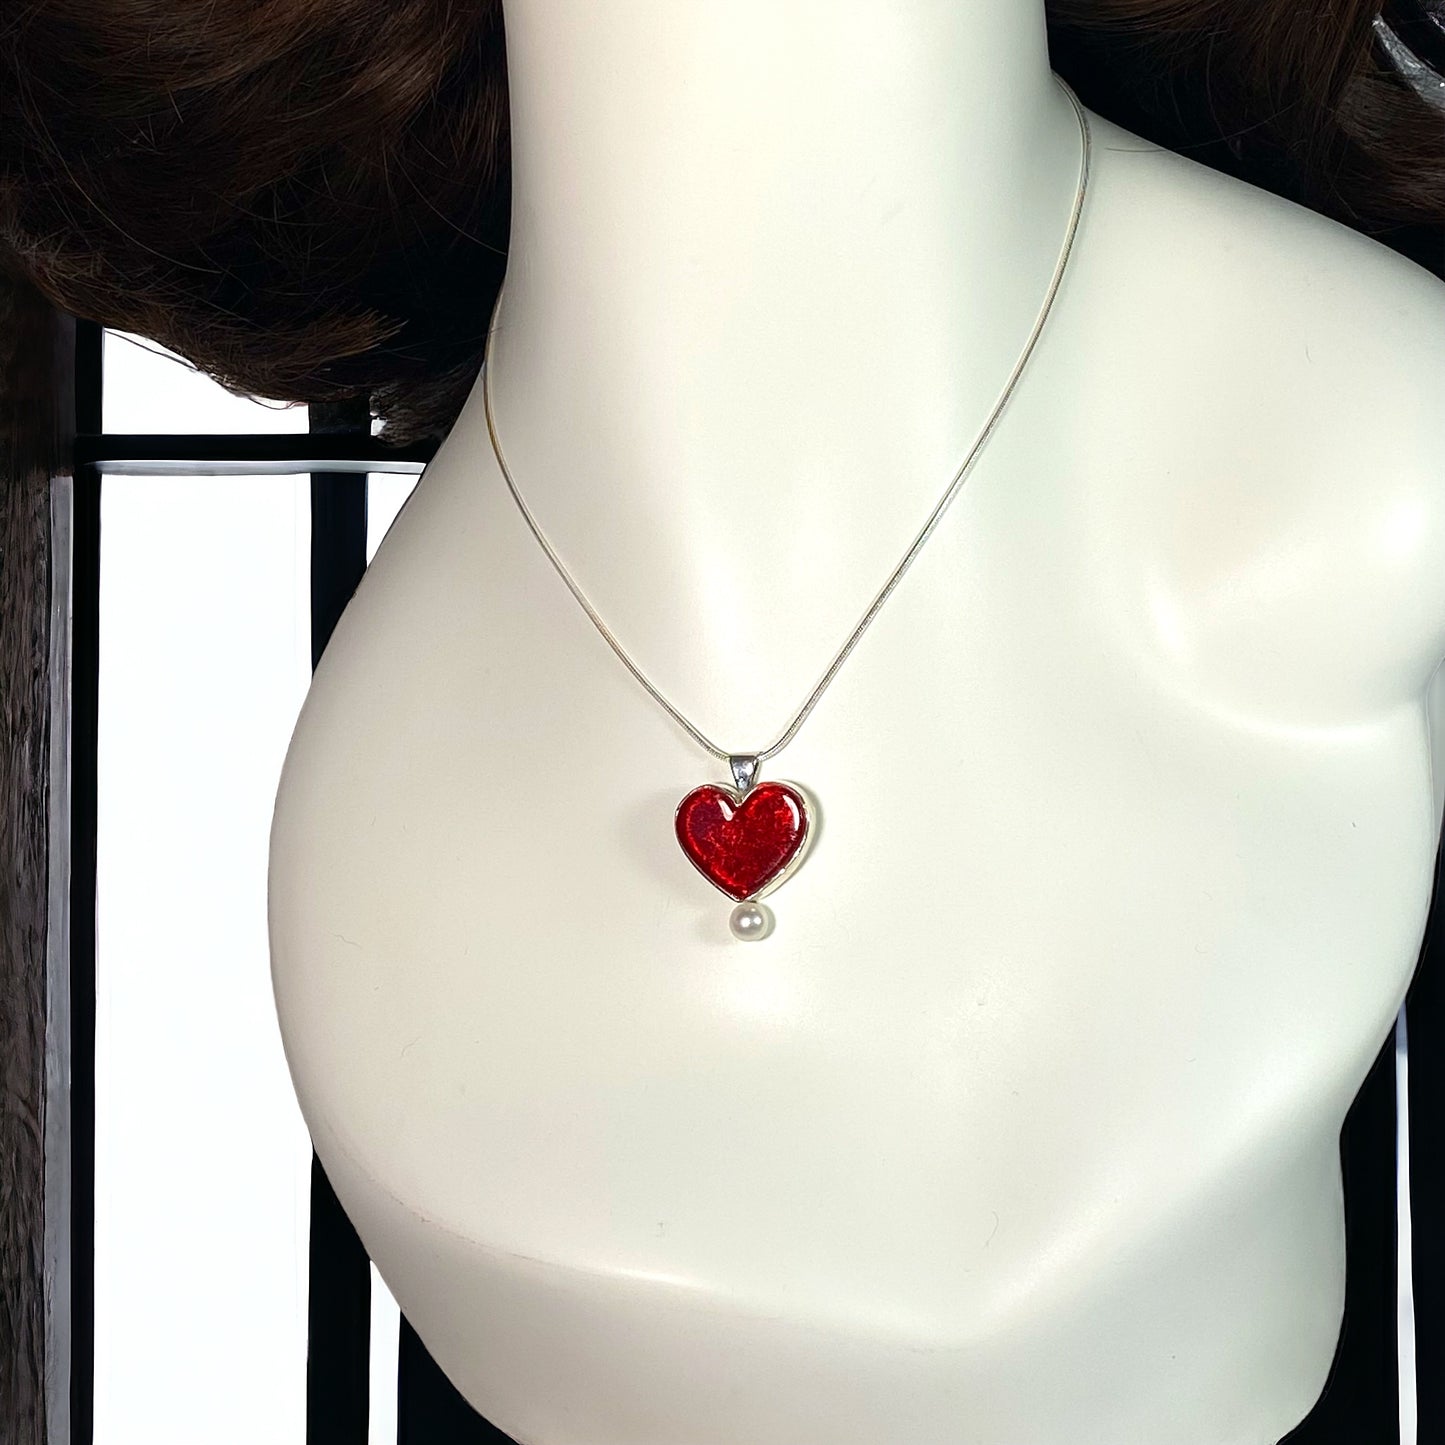 Heart Necklace in Cherry with Pearl